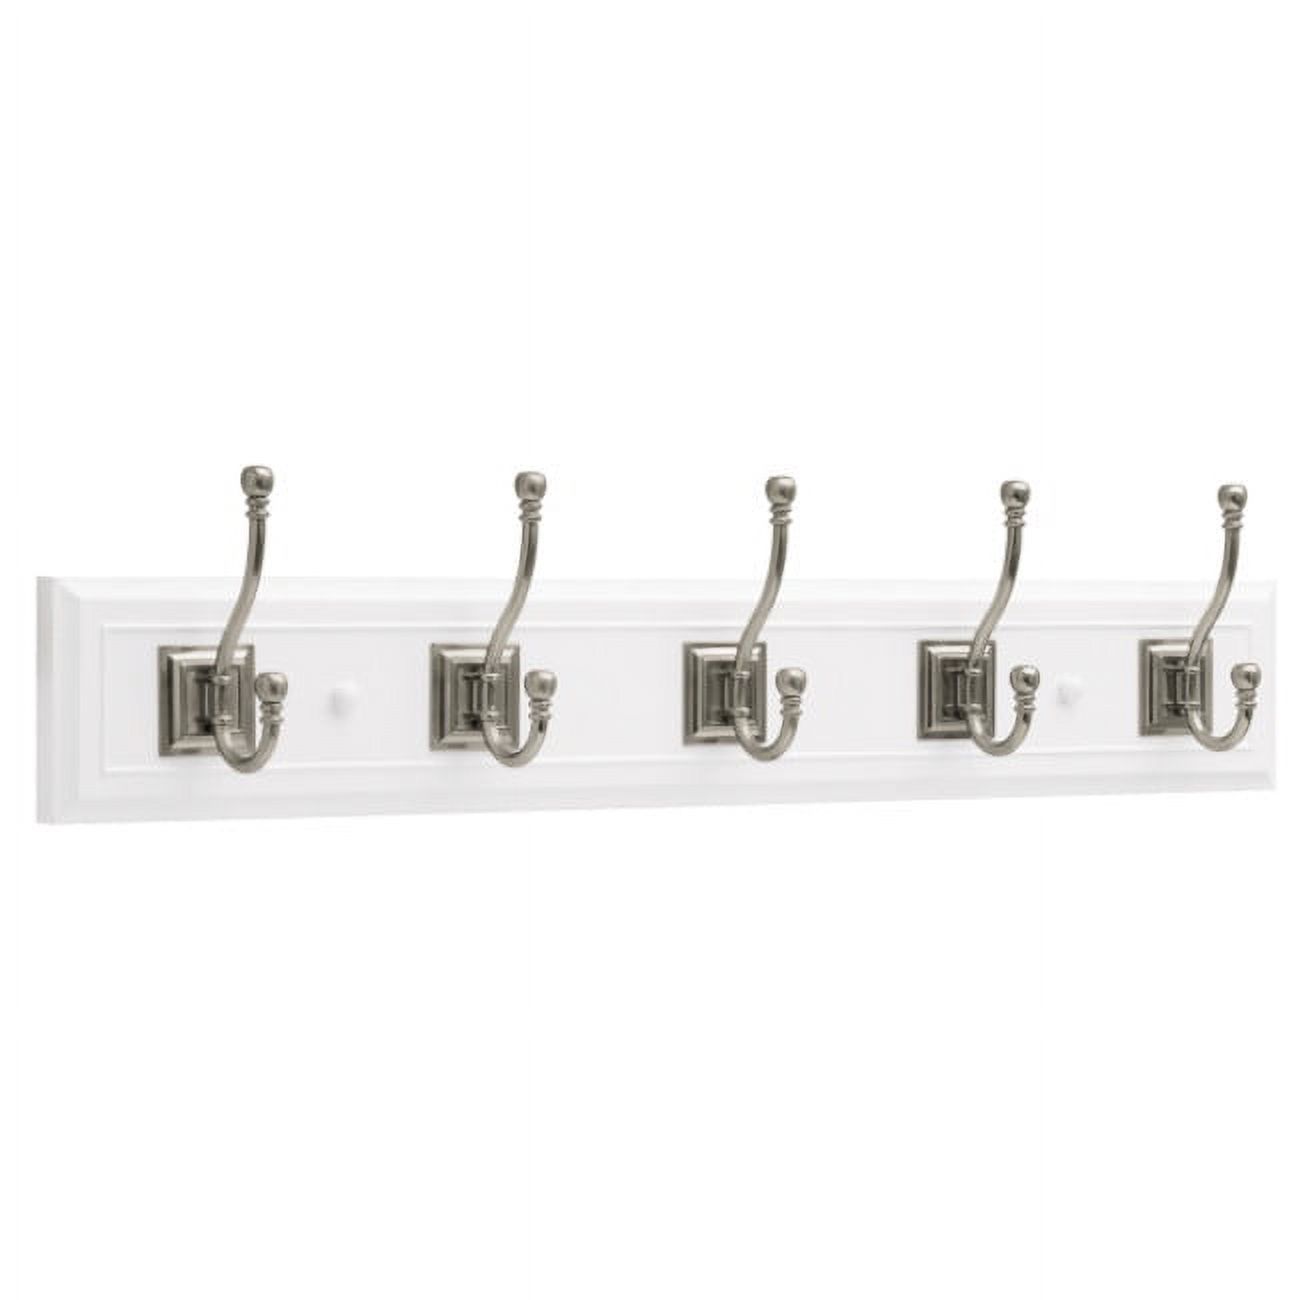 Brainerd 27" Architectural Rail with 5 Architectural Hooks, Flat White and Satin Nickel - image 1 of 2